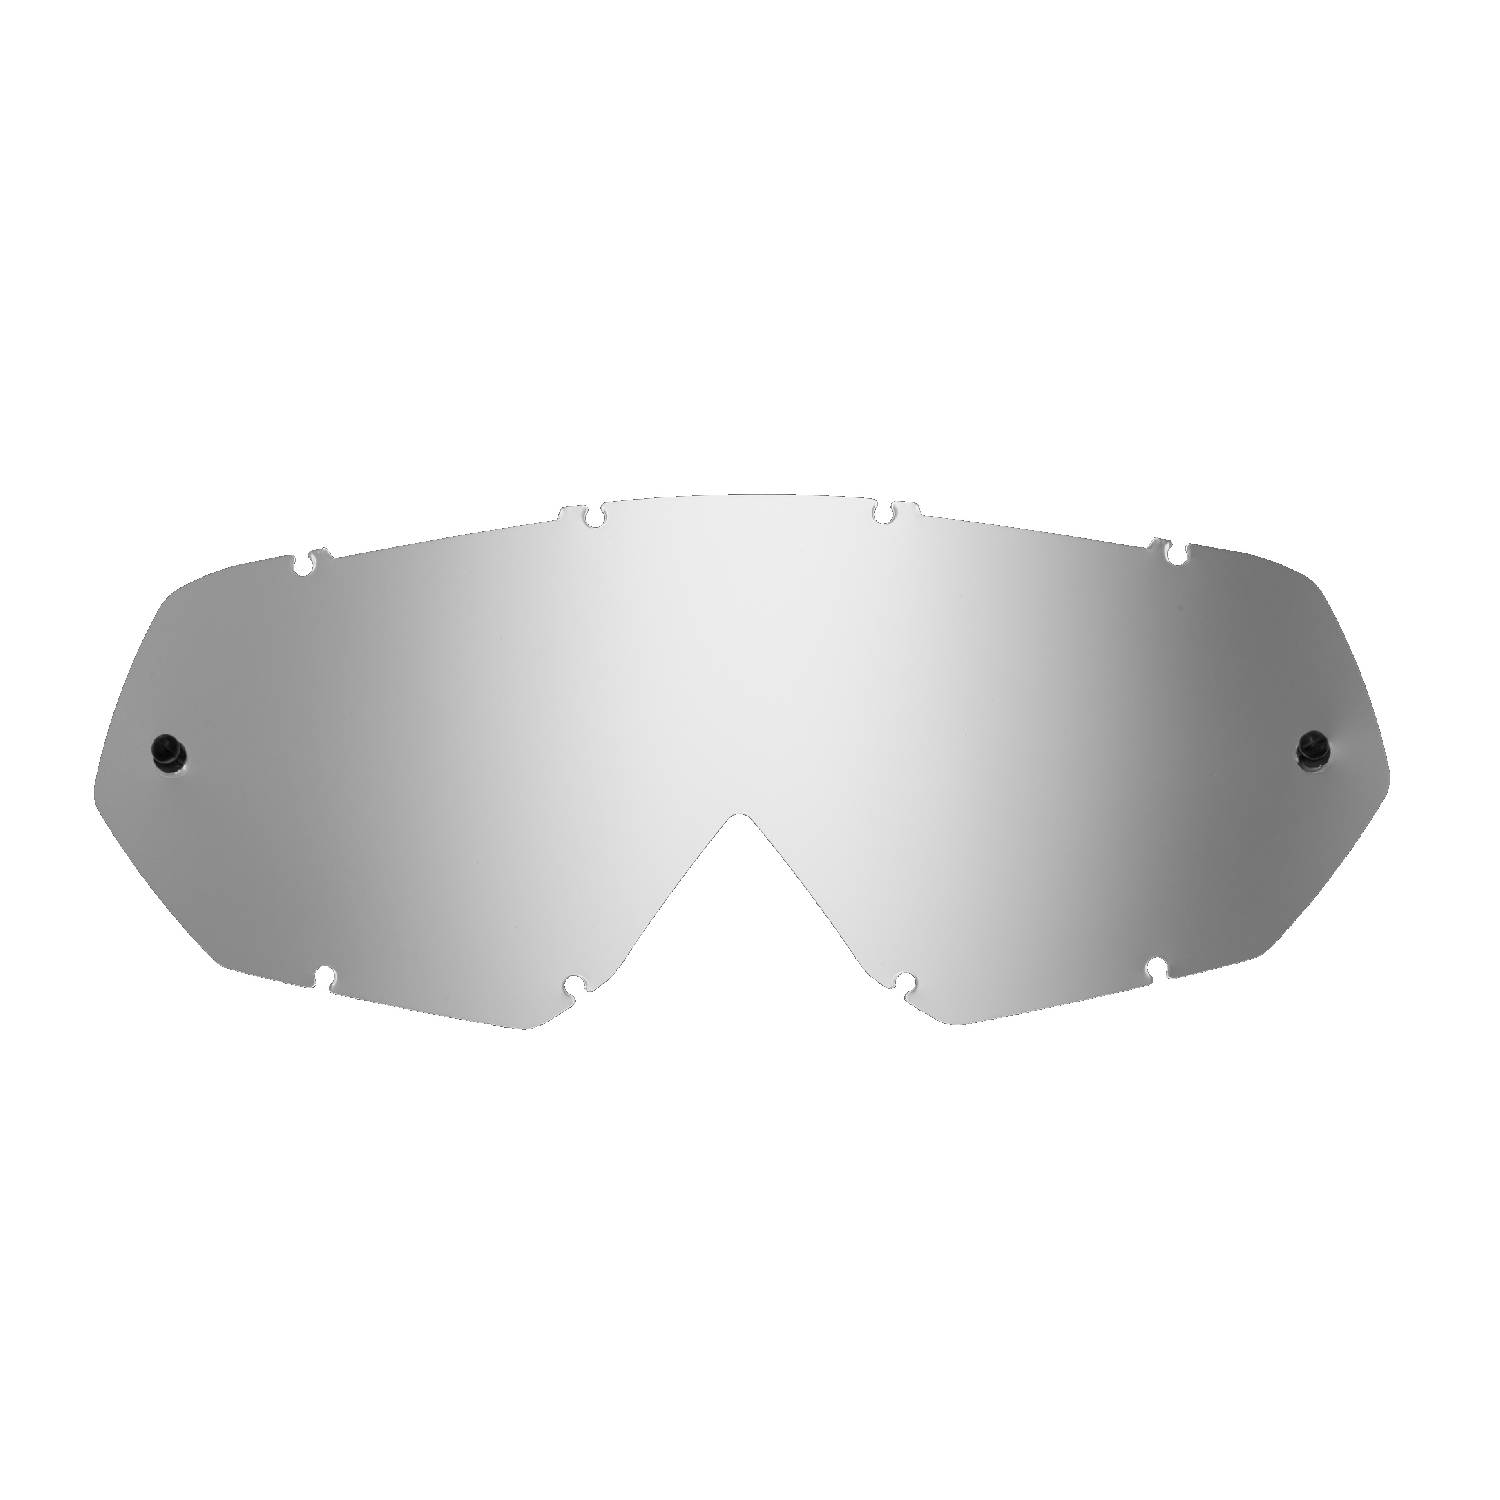 silver-toned mirrored replacement lenses for goggles compatible for Thor Enemy / Hero goggle